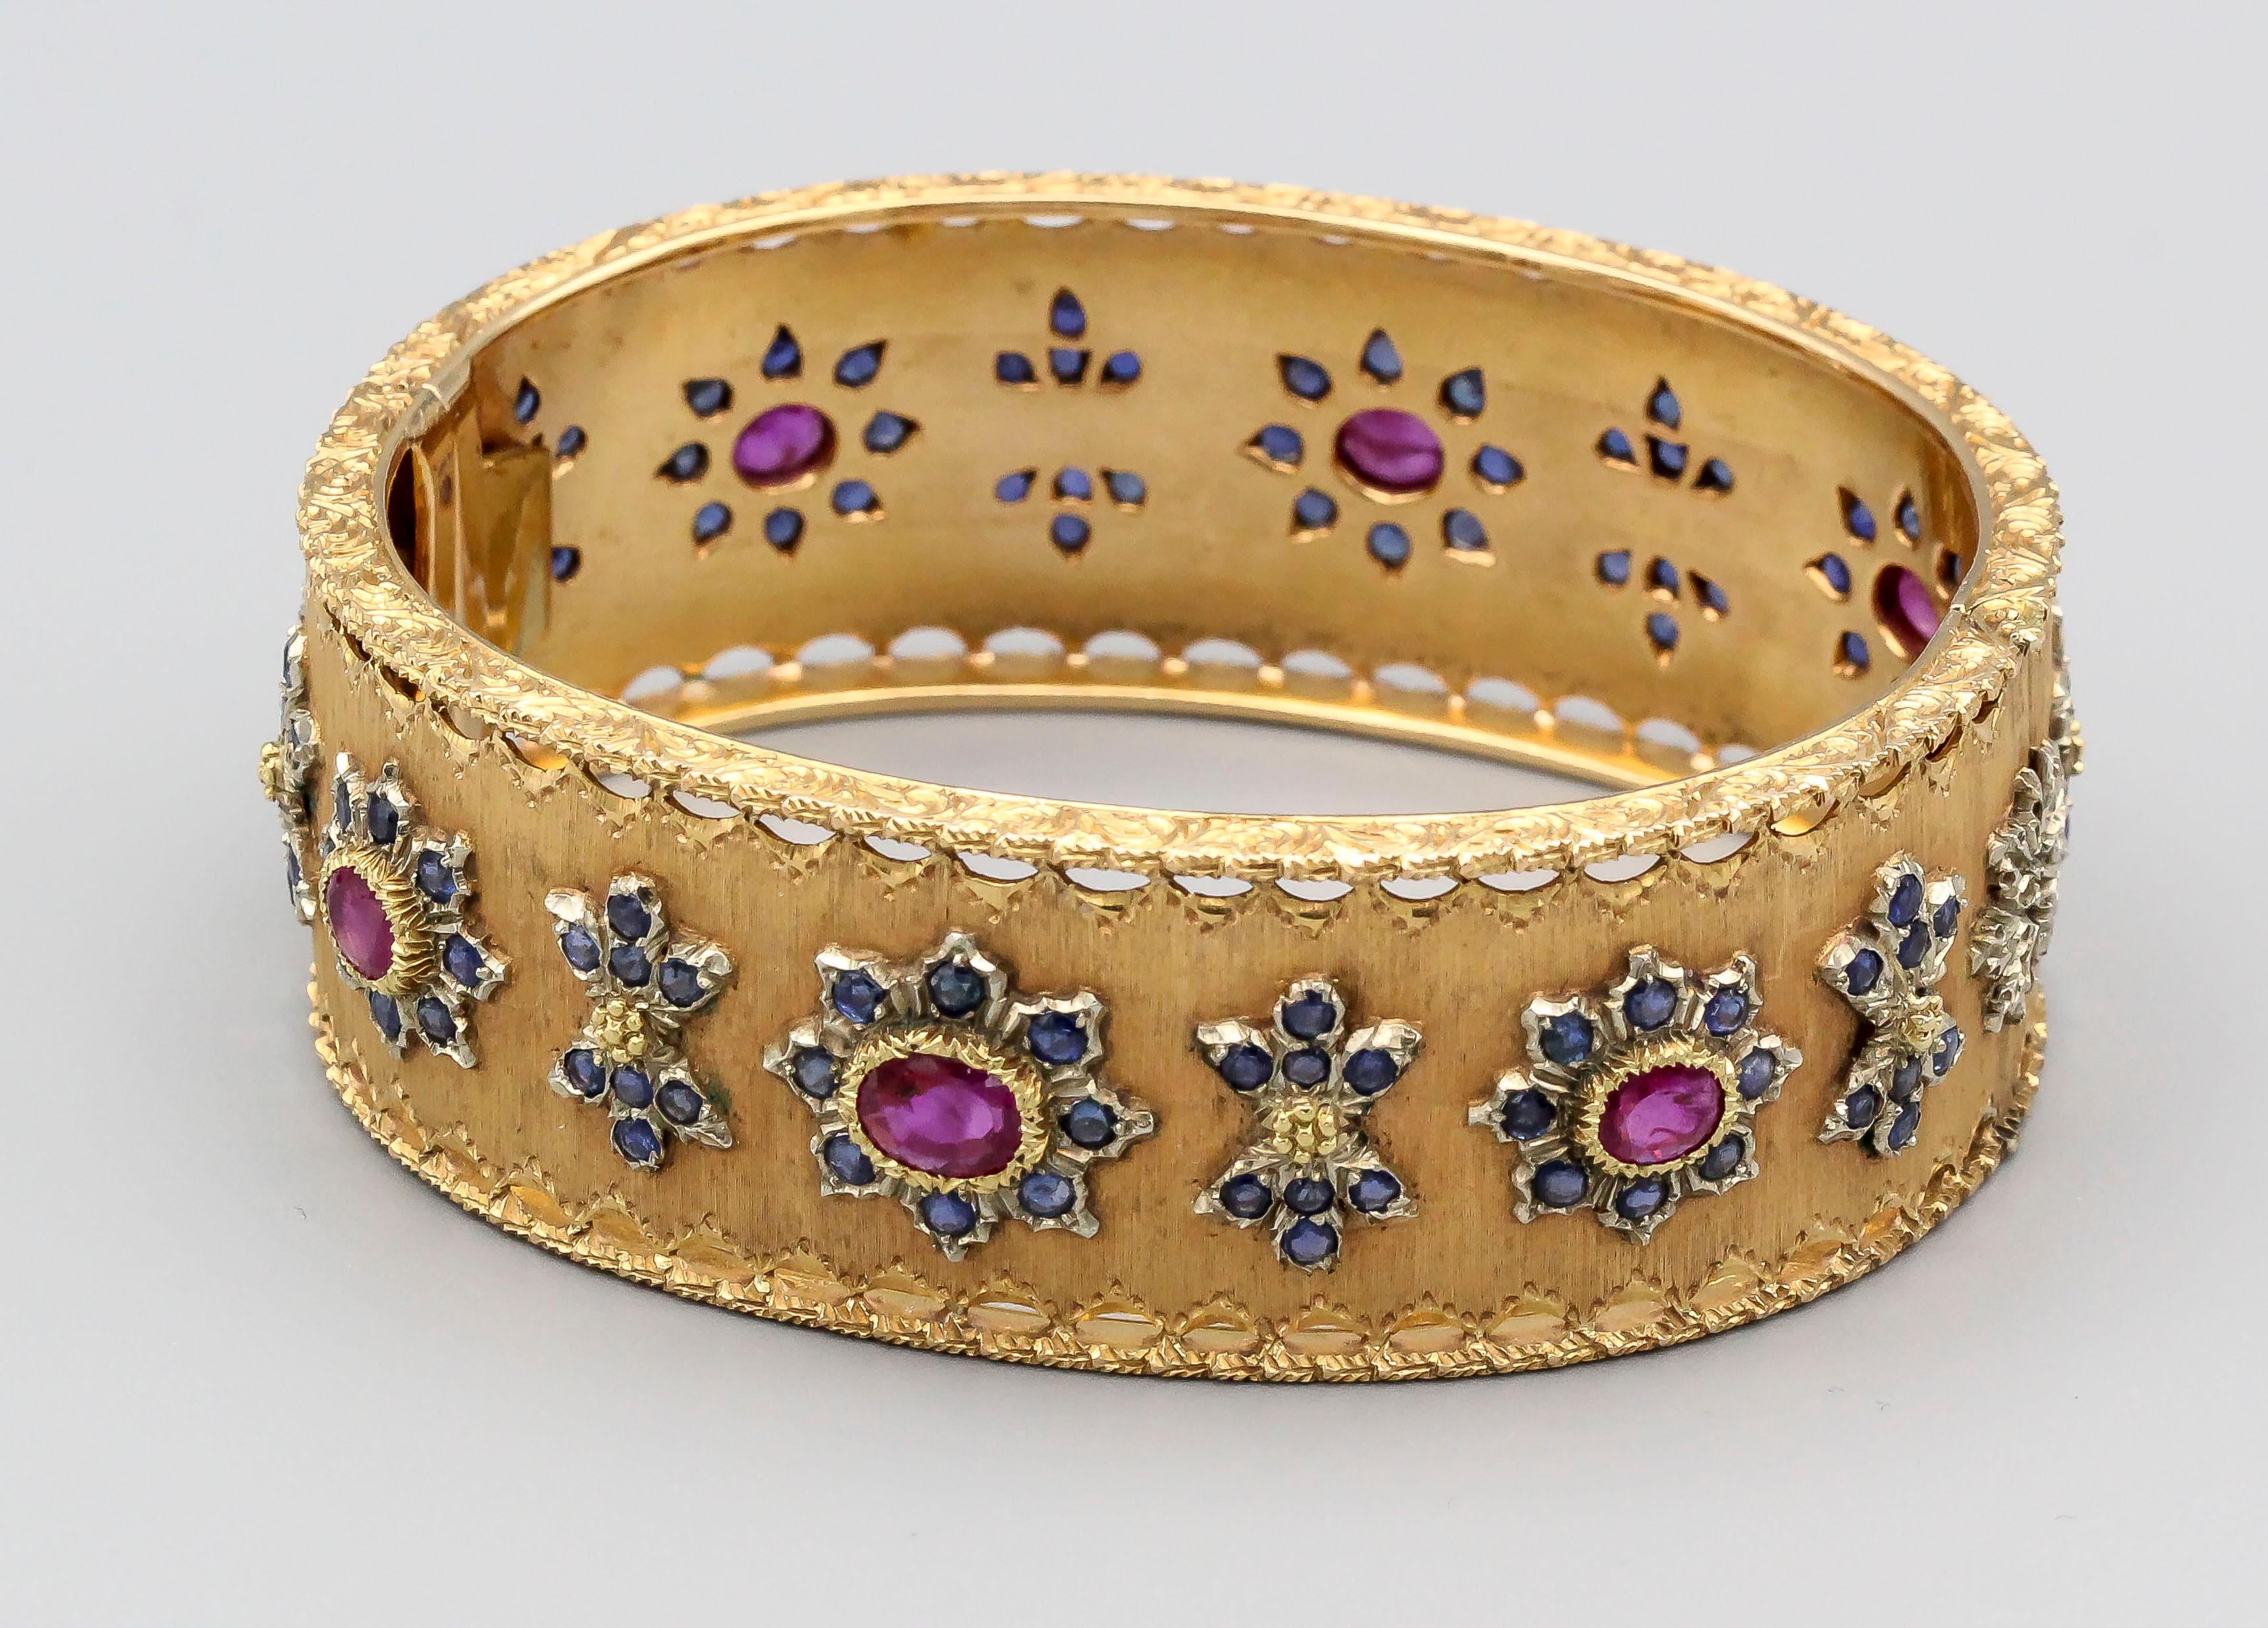 Elegant ruby, sapphire and 18K yellow gold bangle bracelet by Buccellati, circa 1950s. It features rich red rubies and blue sapphires. Comes with original display box. Will comfortably fit a 6